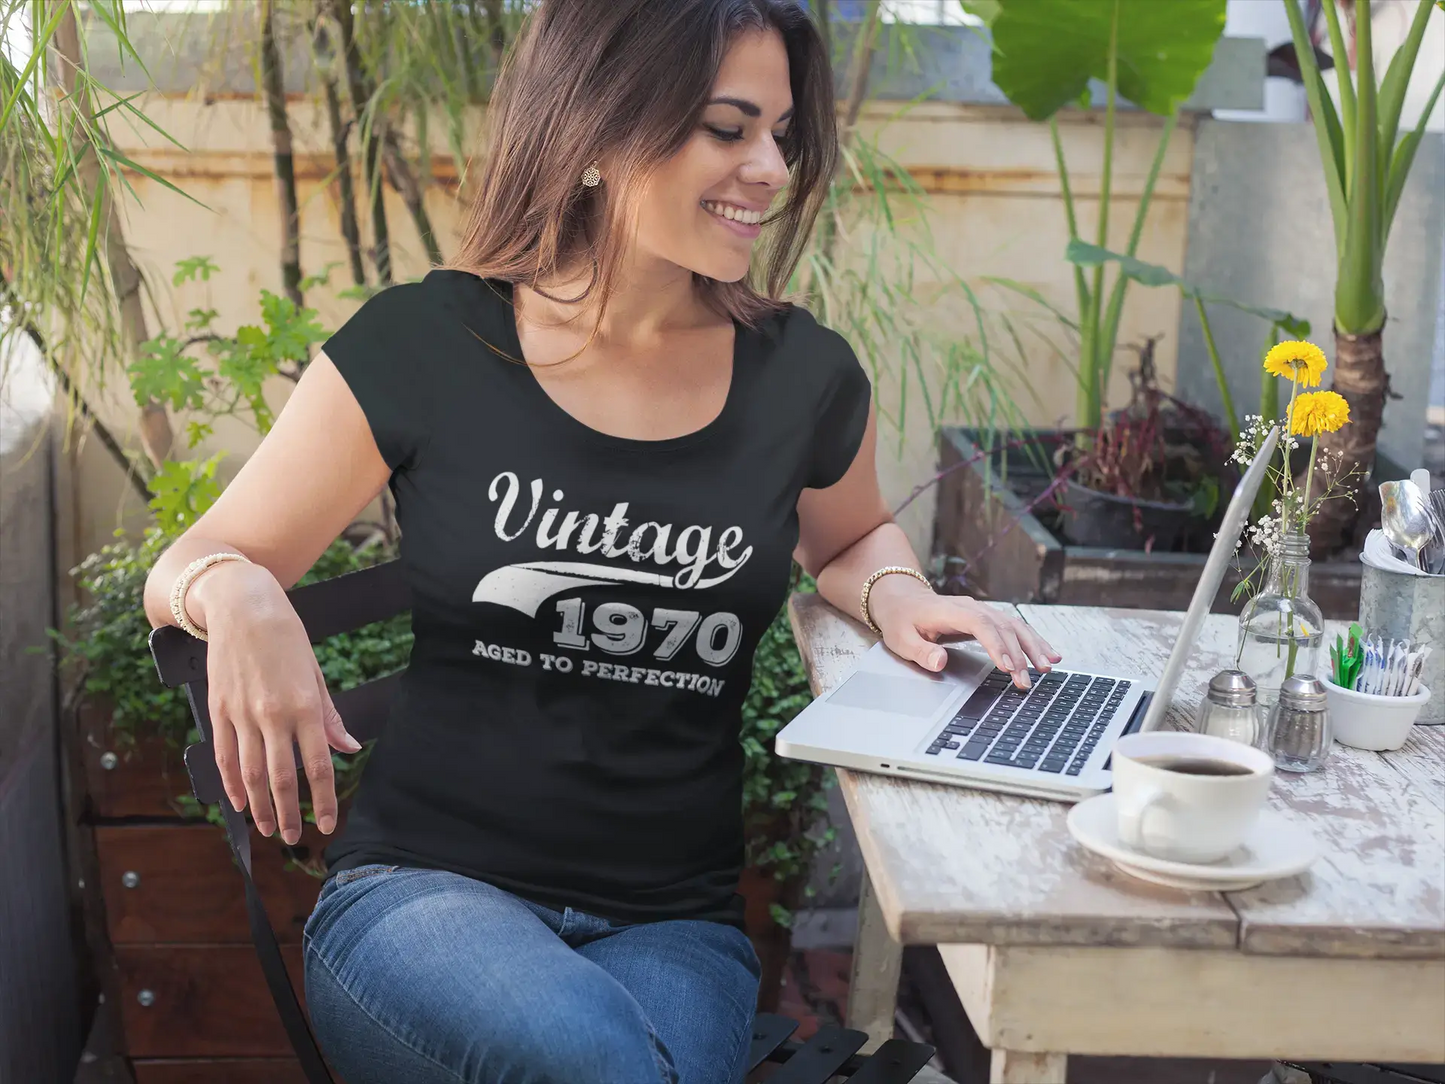 Vintage Aged to Perfection 1970, Black, Women's Short Sleeve Round Neck T-shirt, gift t-shirt 00345